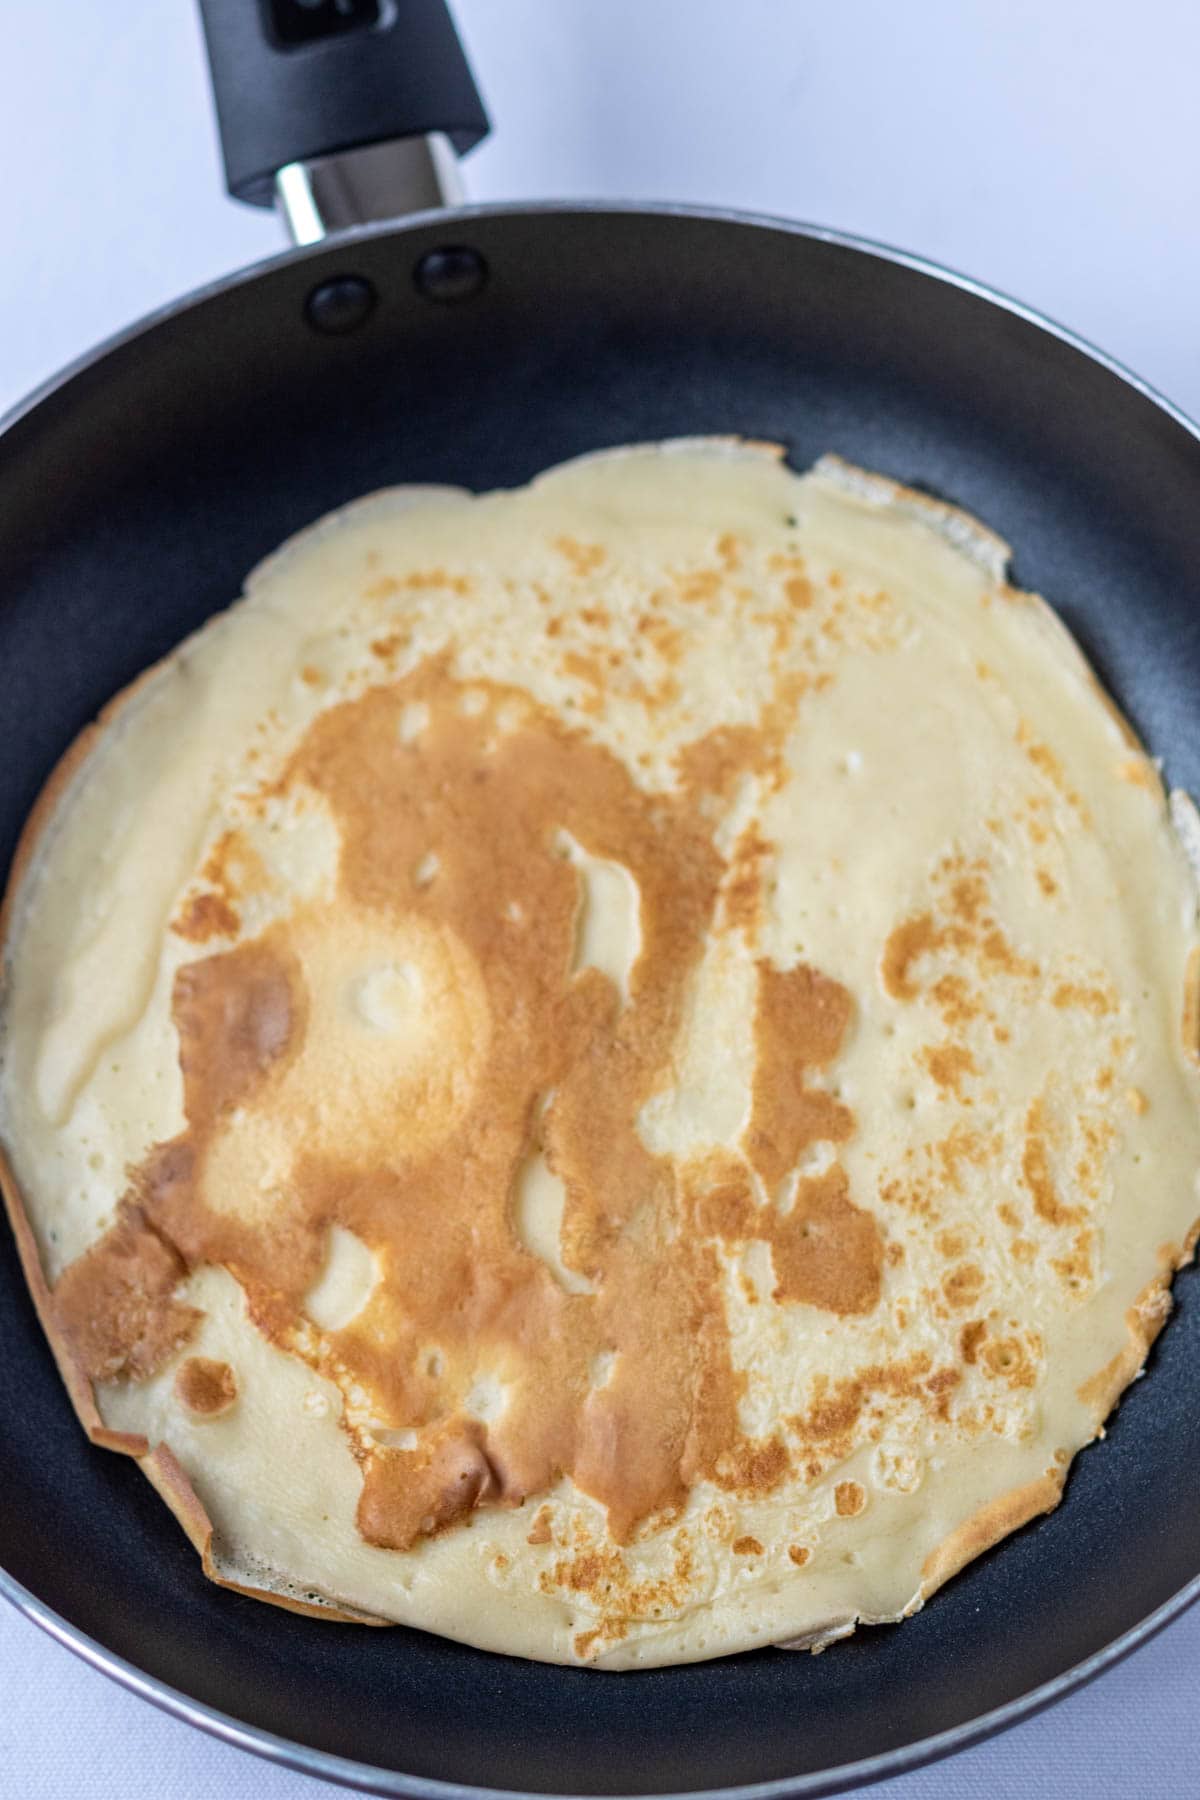 A pancake cooked in a non-stick frying pan.